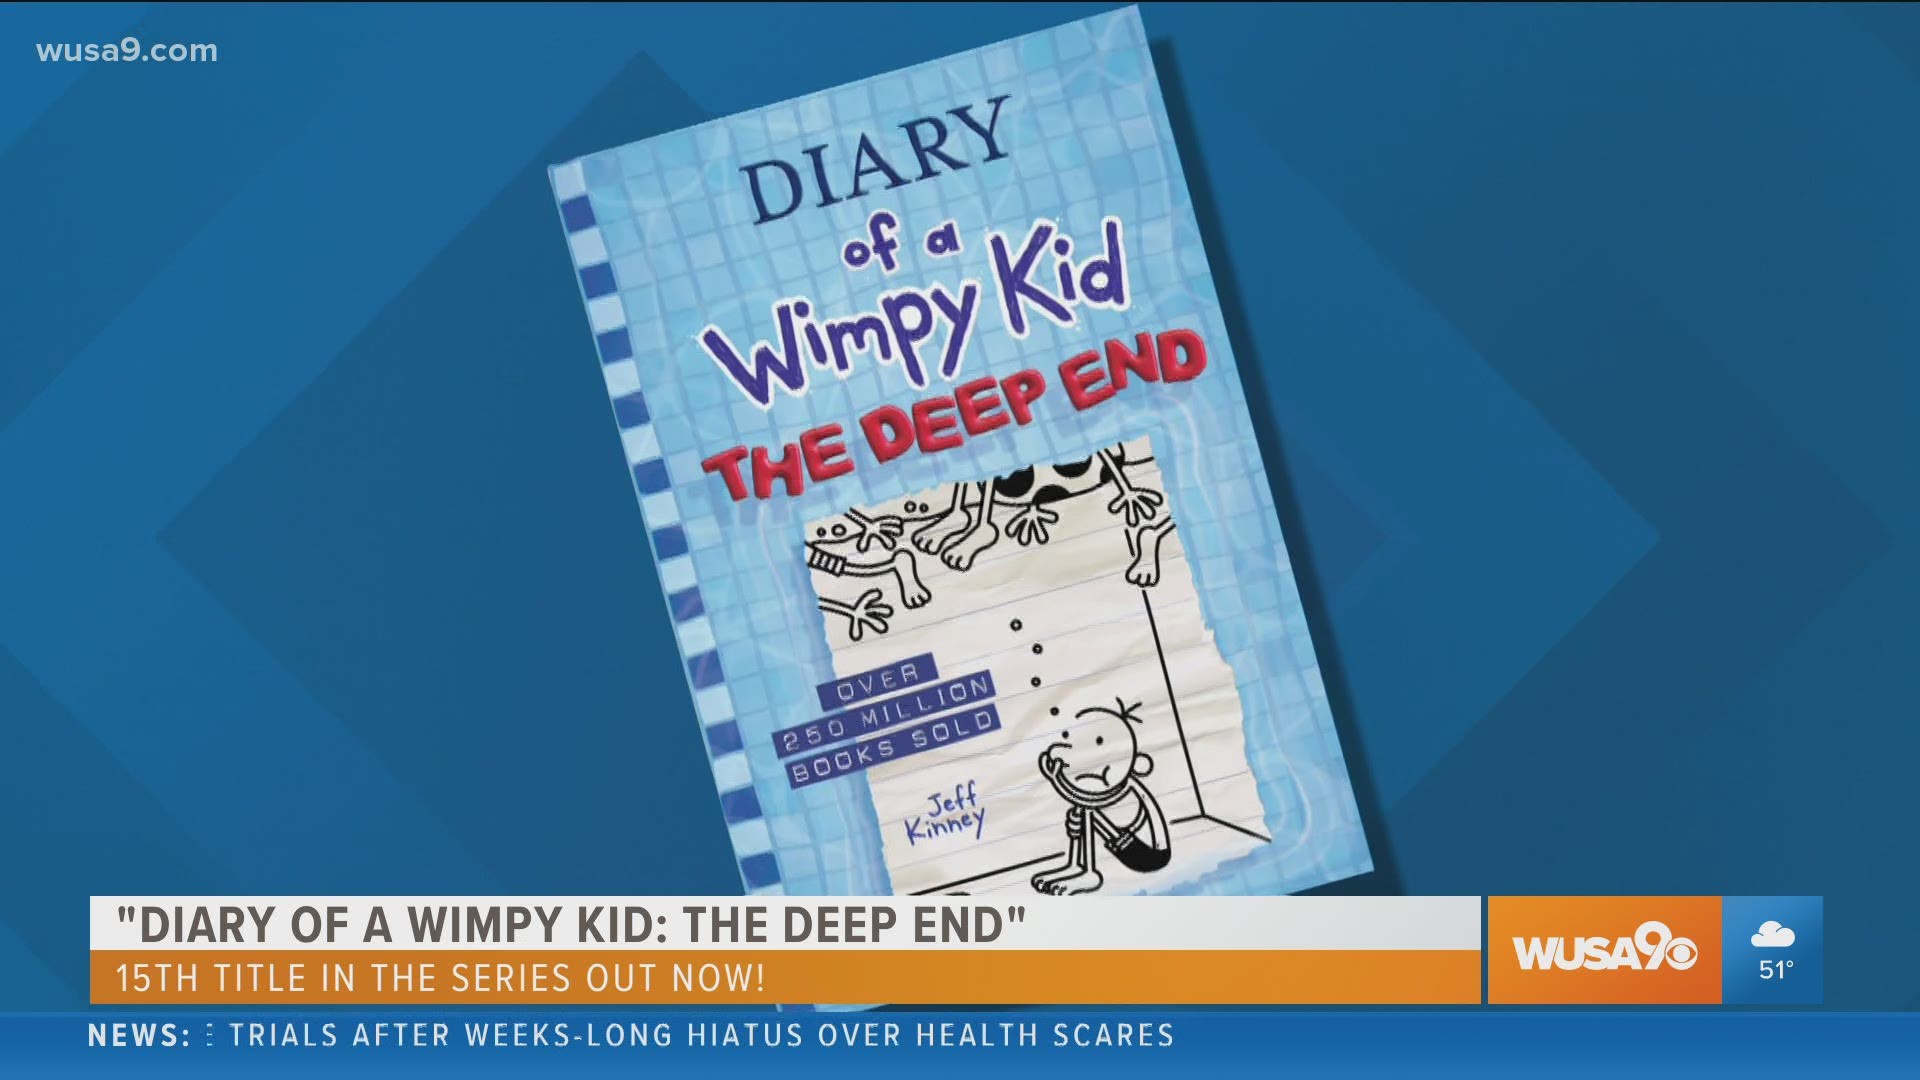 Jeff Kinney, author of the Diary of  Wimpy Kid series, tells us about his 15th book in the series and the social distance event at Blair High School.